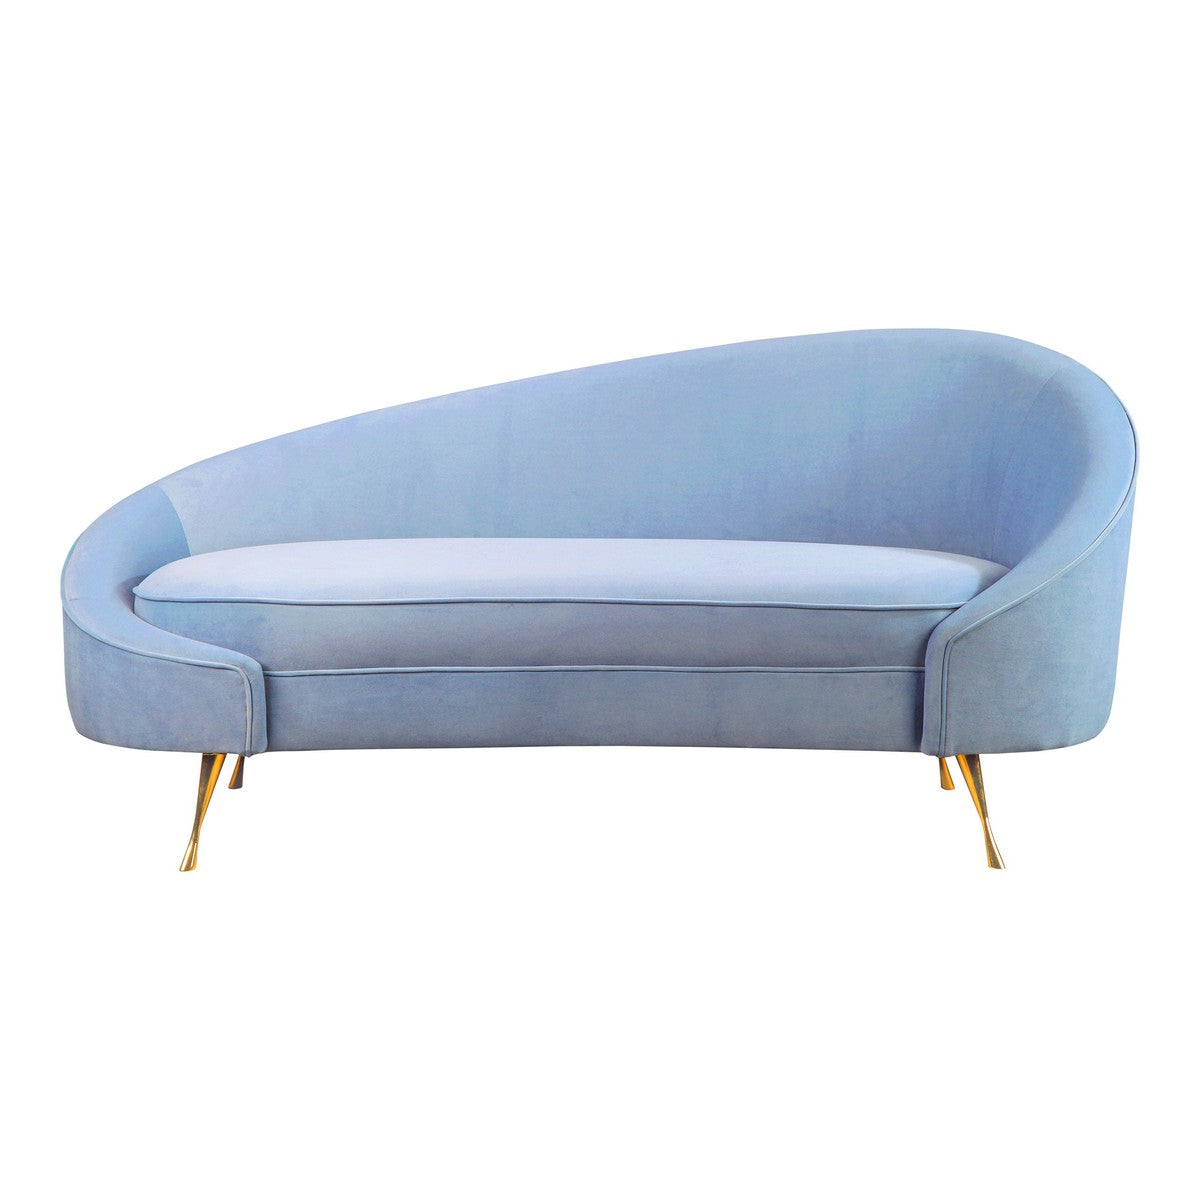 Moe's Home Collection Abigail Chaise Blue - ME-1053-28 - Moe's Home Collection - chaise lounges - Minimal And Modern - 1